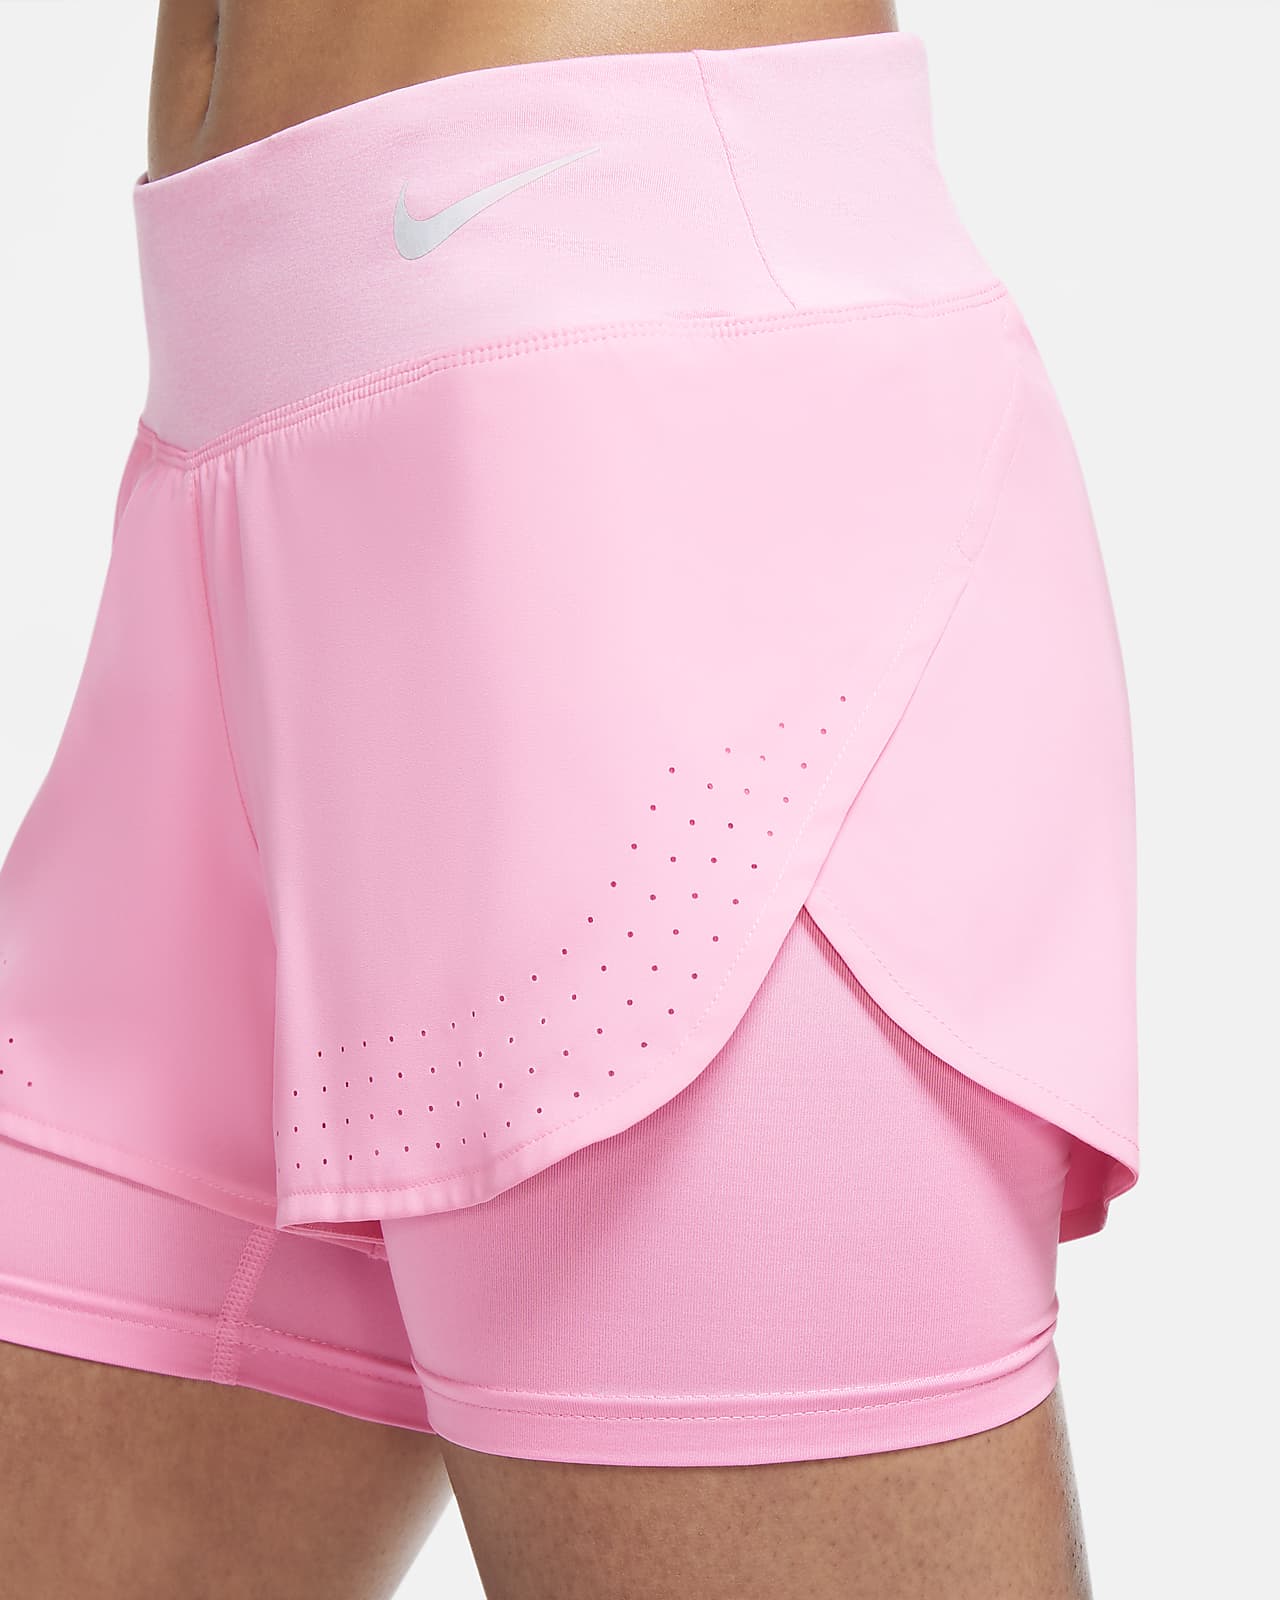 nike eclipse 2 in 1 running shorts